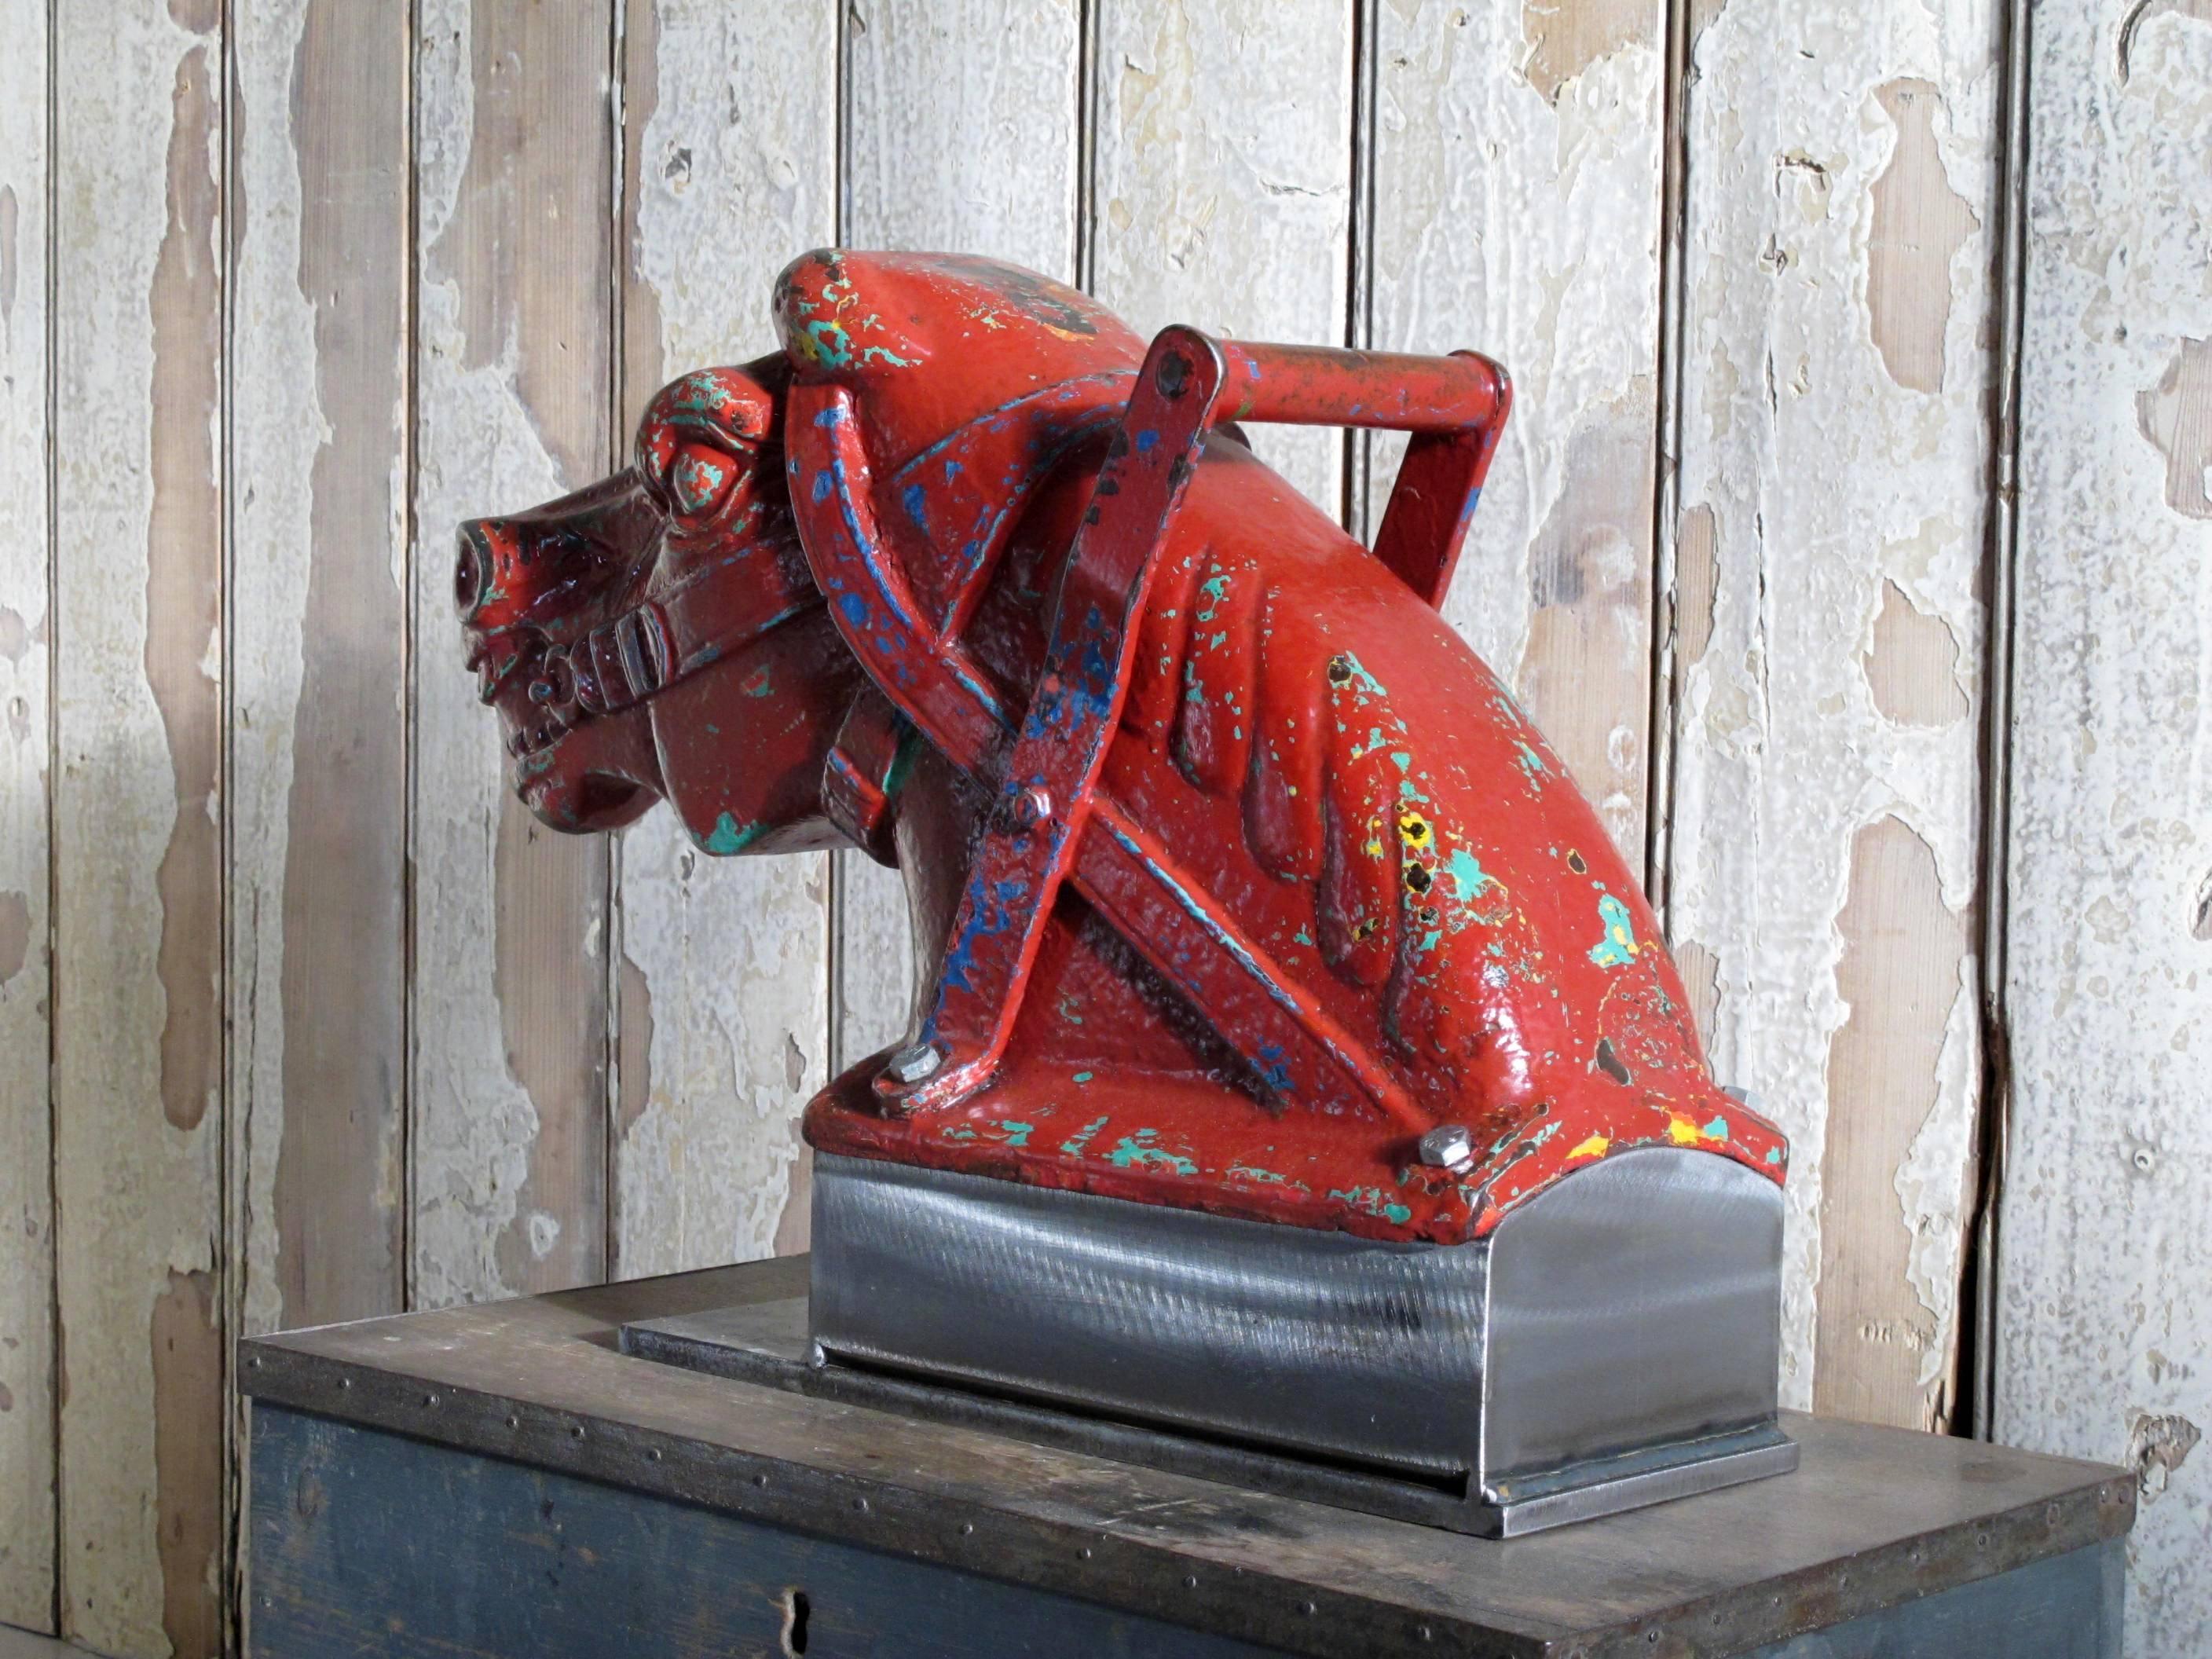 Cast-iron horse head from a playground ride. With original paint layers. Mounted onto a custom-made burnished steel base.